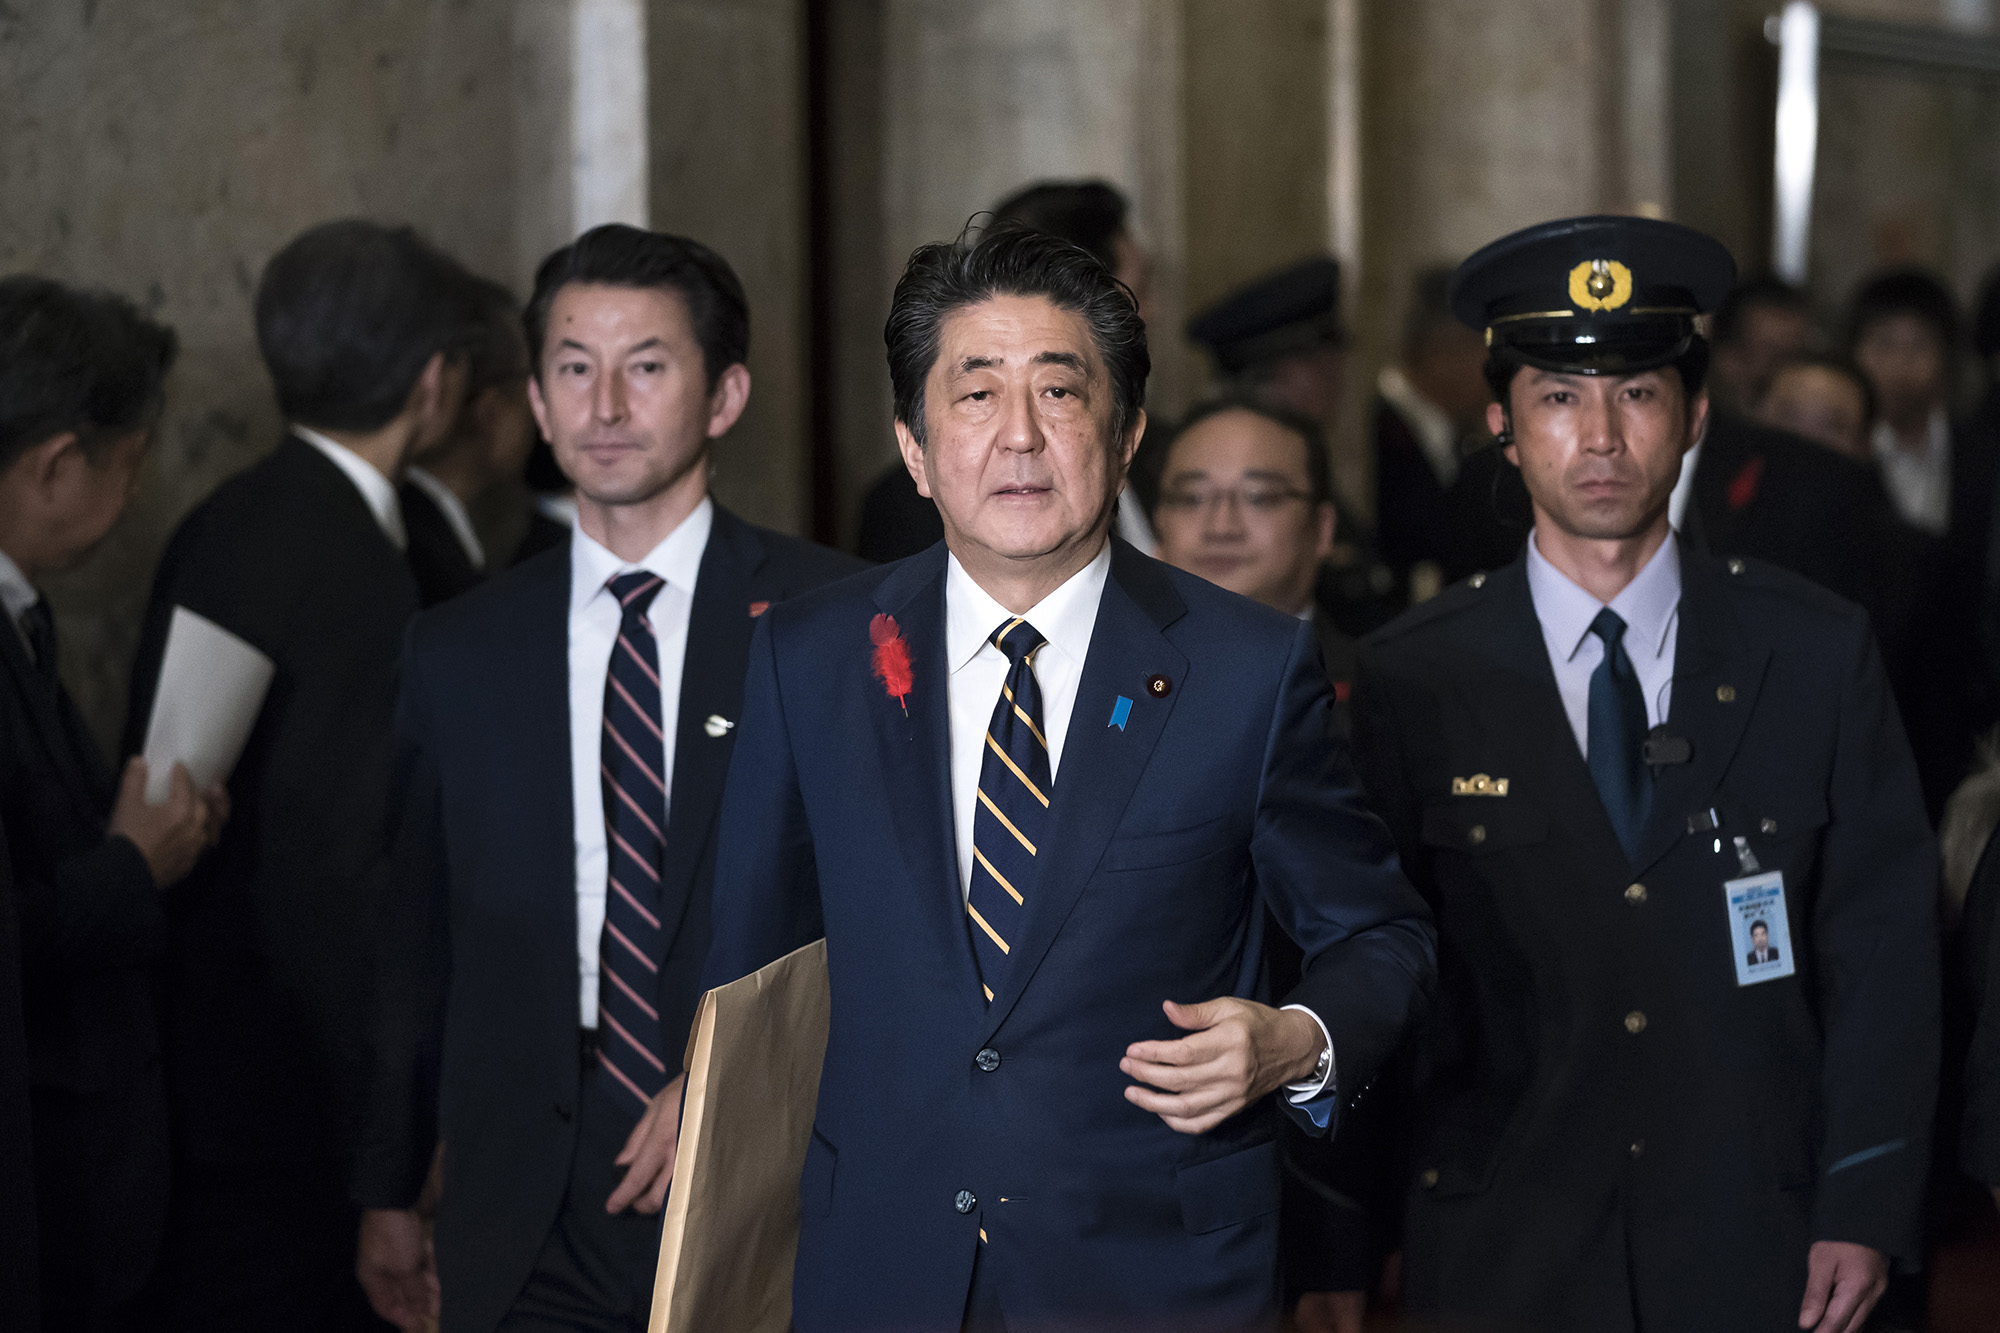 Japan's Prime Minister Shinzo Abe arrives at the chamber to deliver his policy speech at the lower house of the parliament on October 4, 2019 in Tokyo.